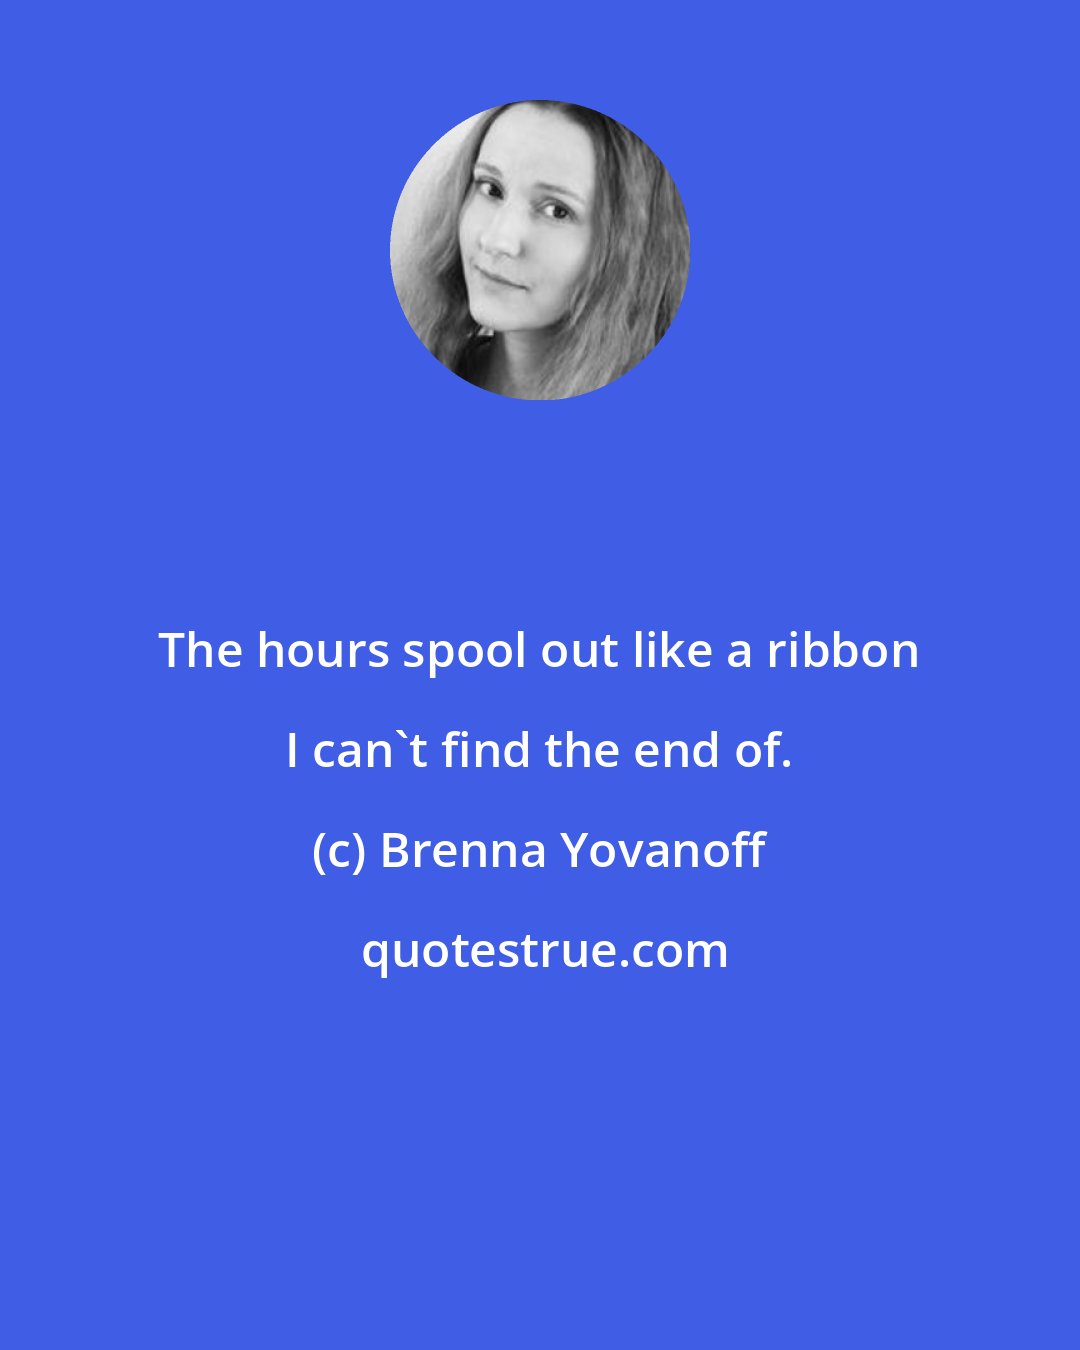 Brenna Yovanoff: The hours spool out like a ribbon I can't find the end of.